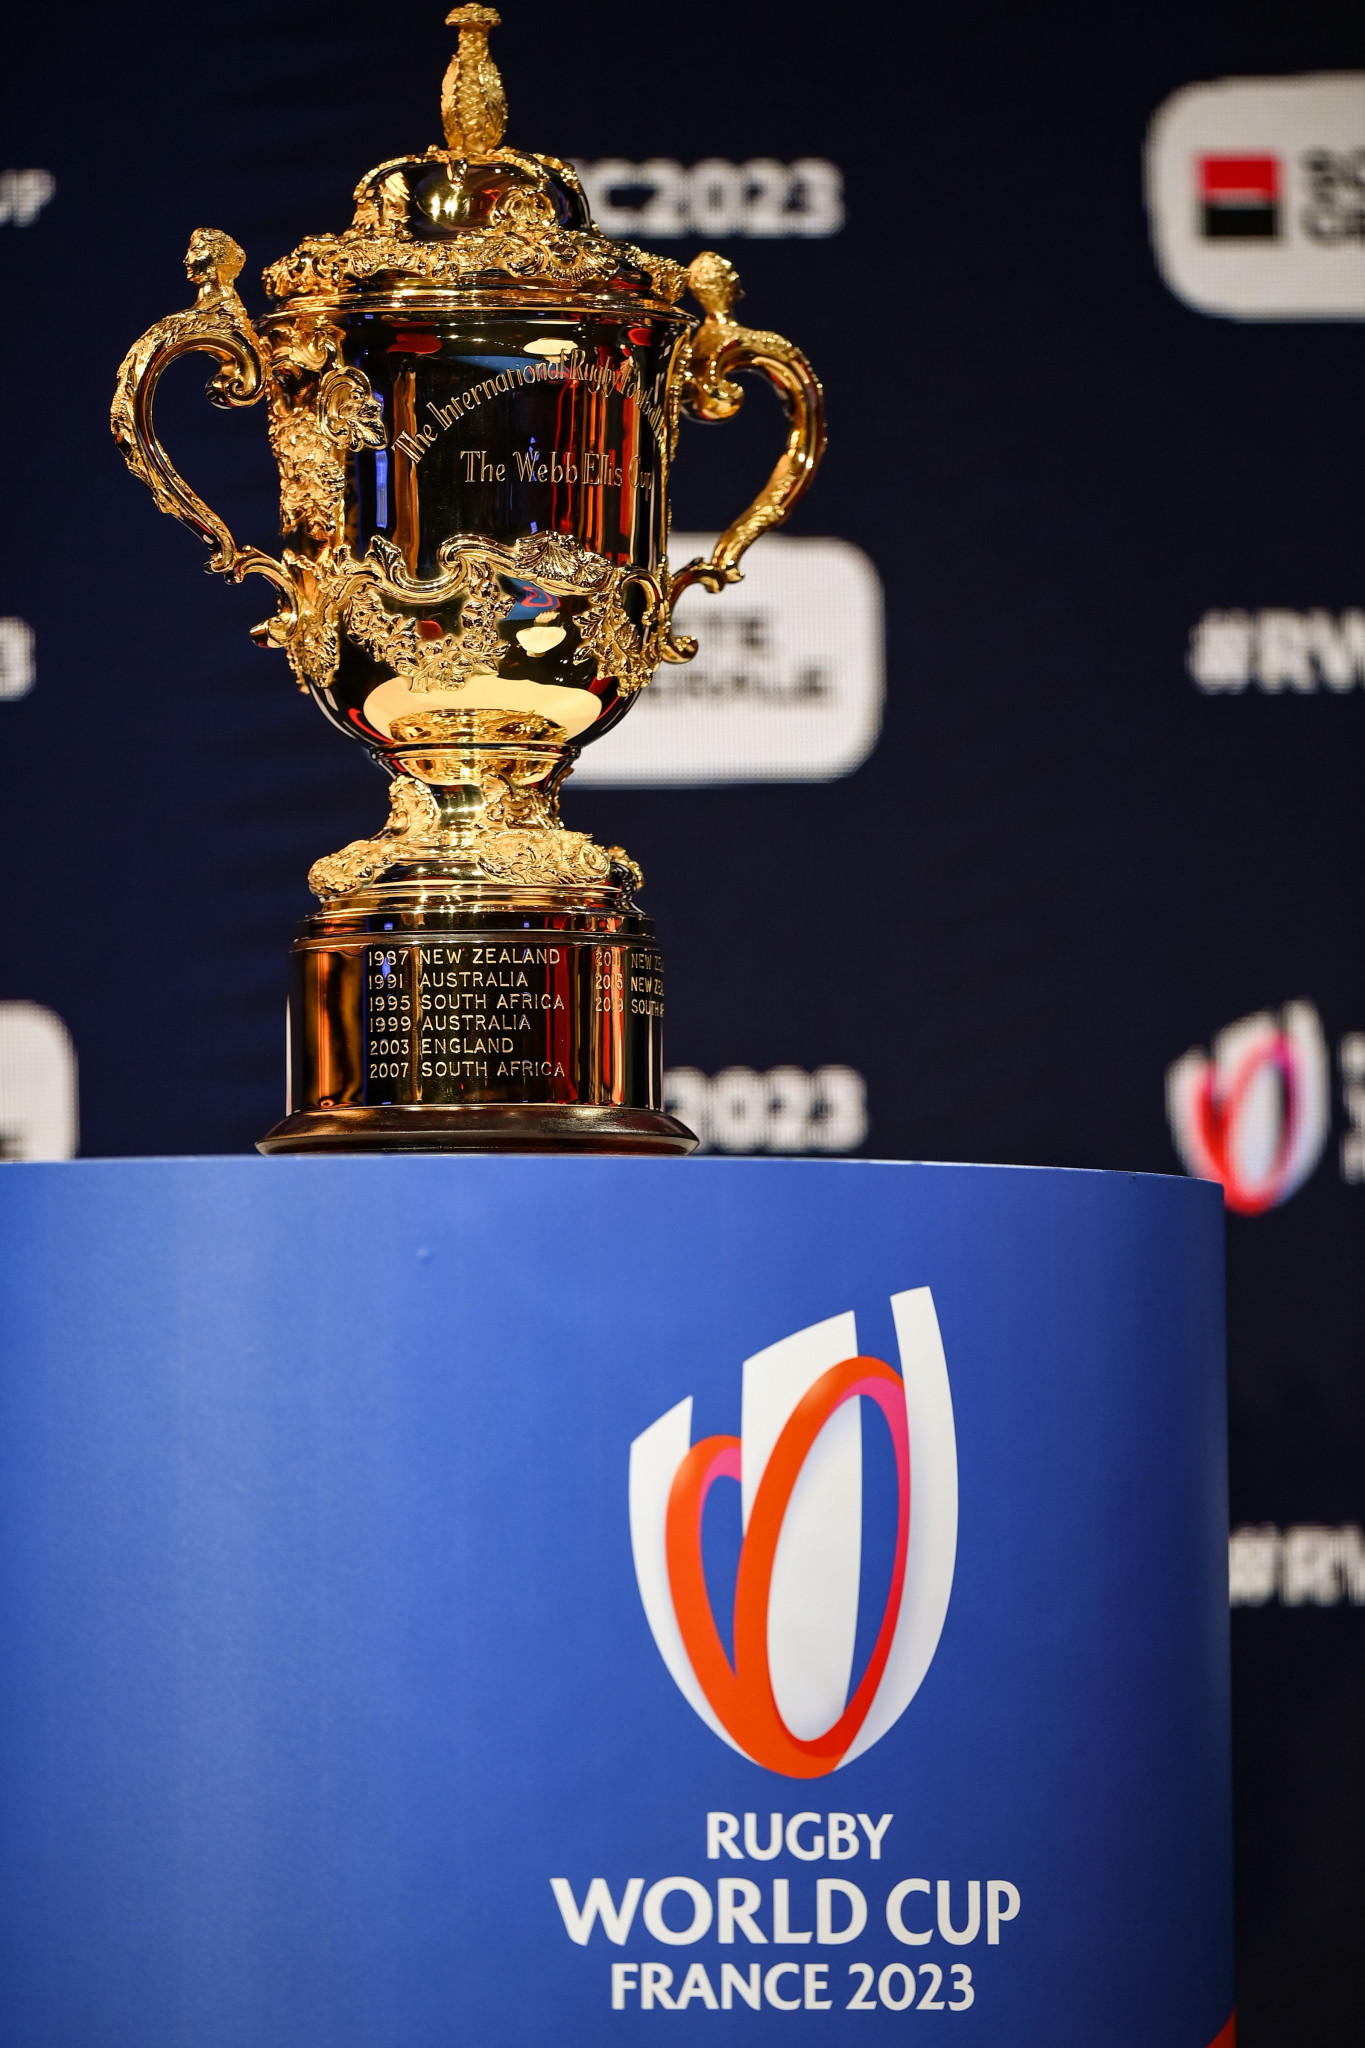 The crisis comes with France set to host the Rugby World Cup in 2023 ©Getty Images